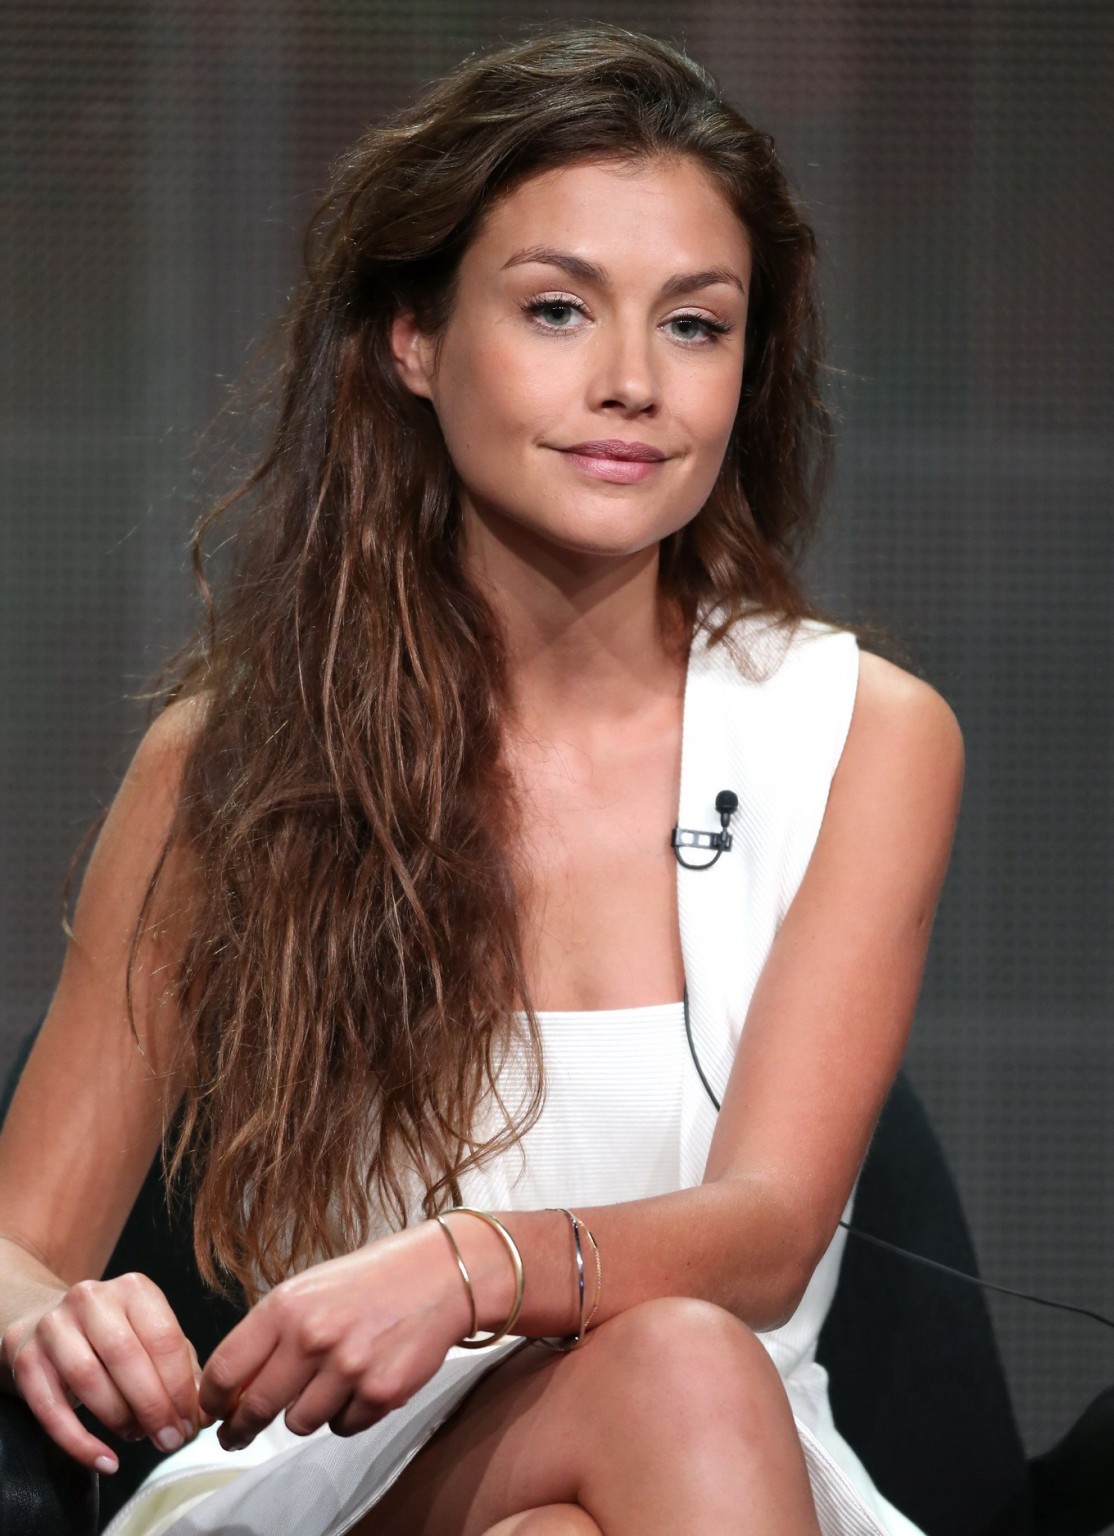 Hannah Ware upskirt and showing big cleavage in a hot white mini dress at 2013 S #75222640